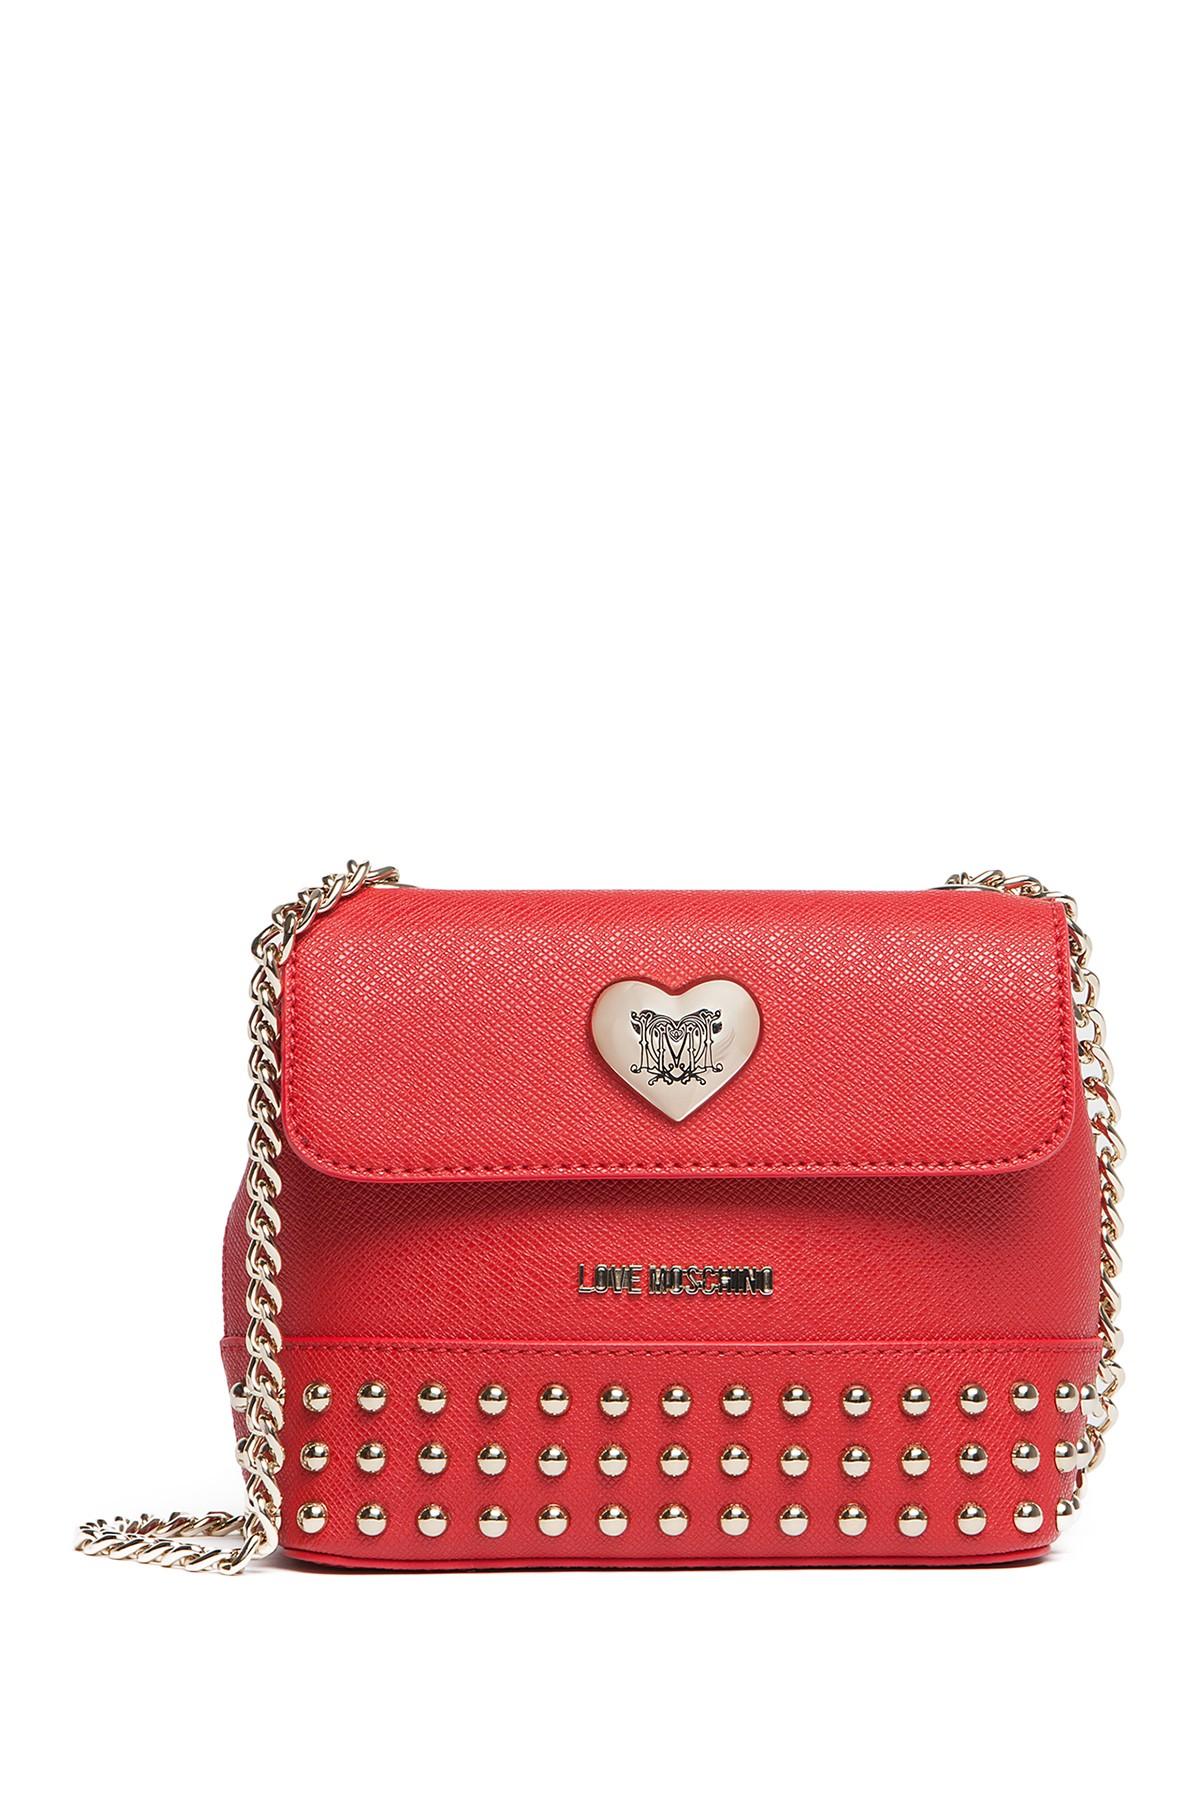 Love moschino Studded Chain Strap Shoulder Bag in Red | Lyst